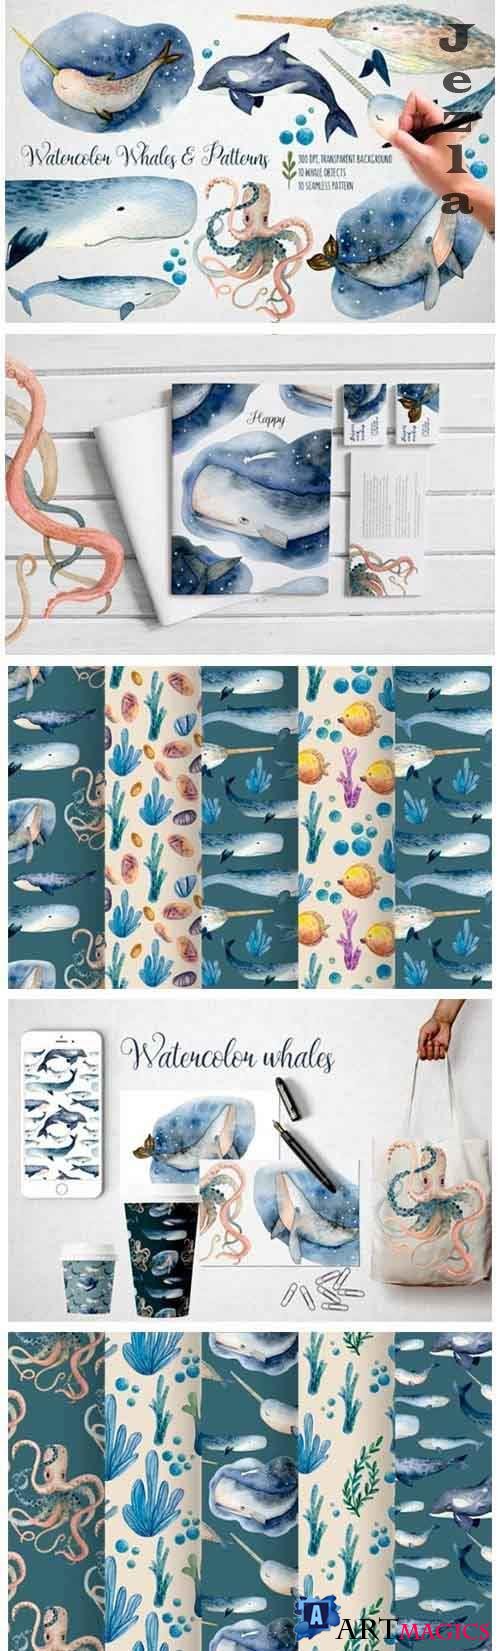 Watercolor Whales & Patterns - 5228352